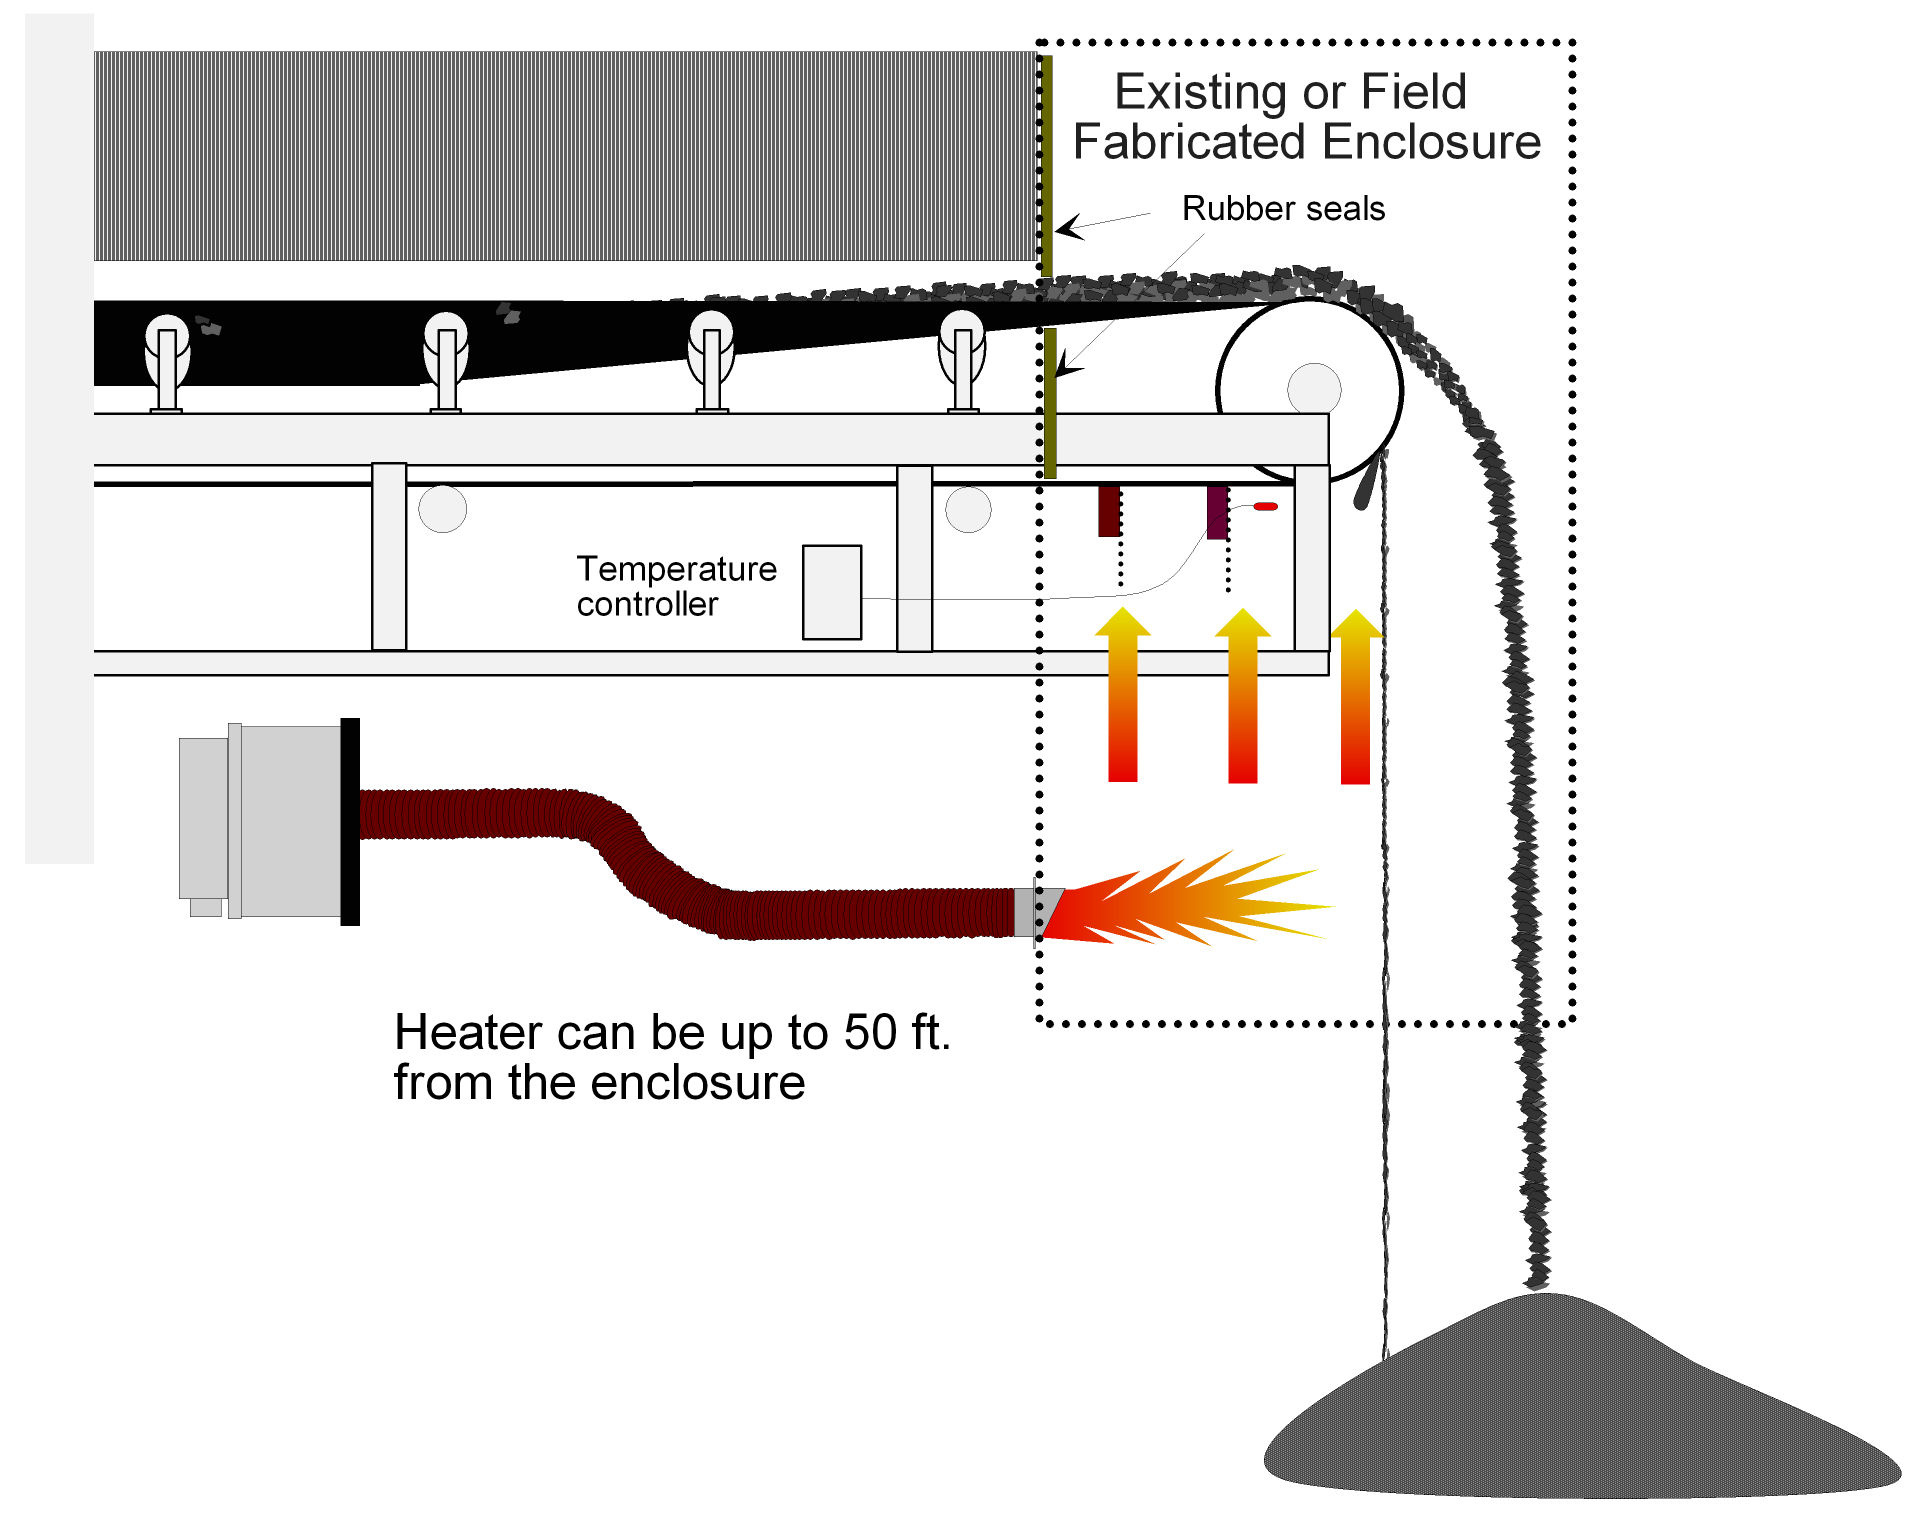 Graphic illustrating the effectiveness of the scraper heater.